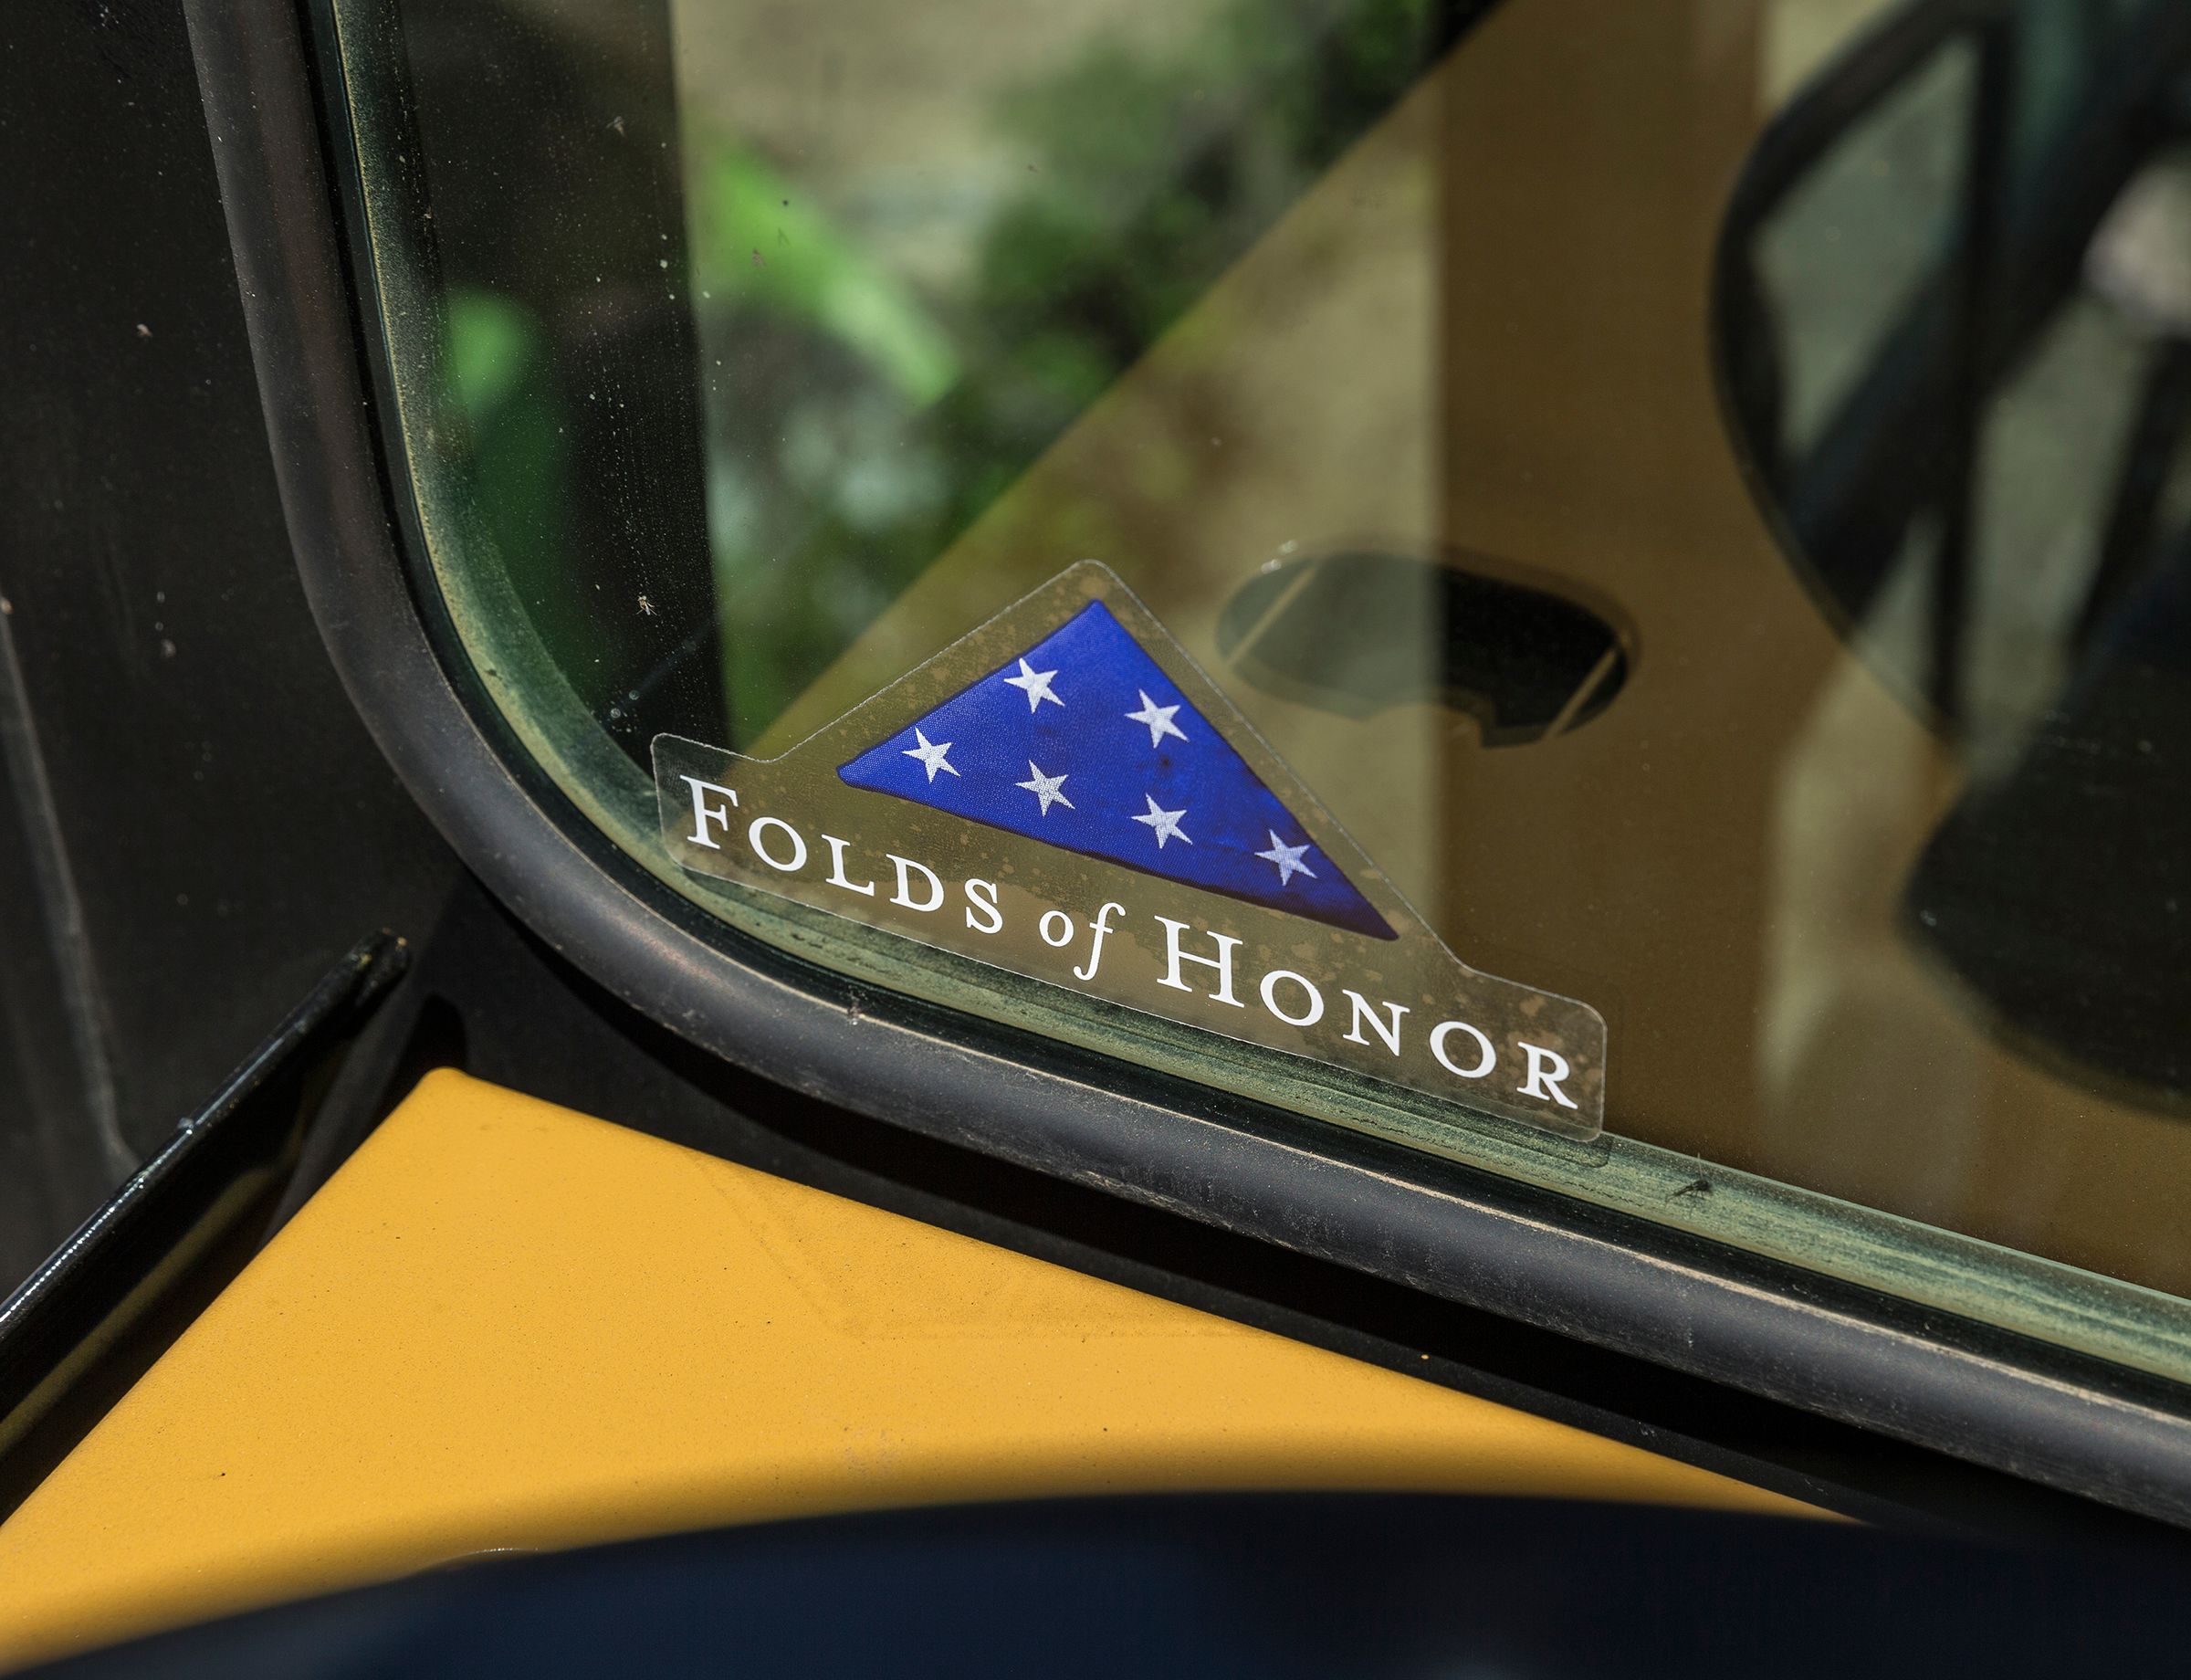 Recently, the Scherbers connected with Folds of Honor, a nonprofit organization that provides scholarships to spouses and children of America’s fallen and disabled service-members.